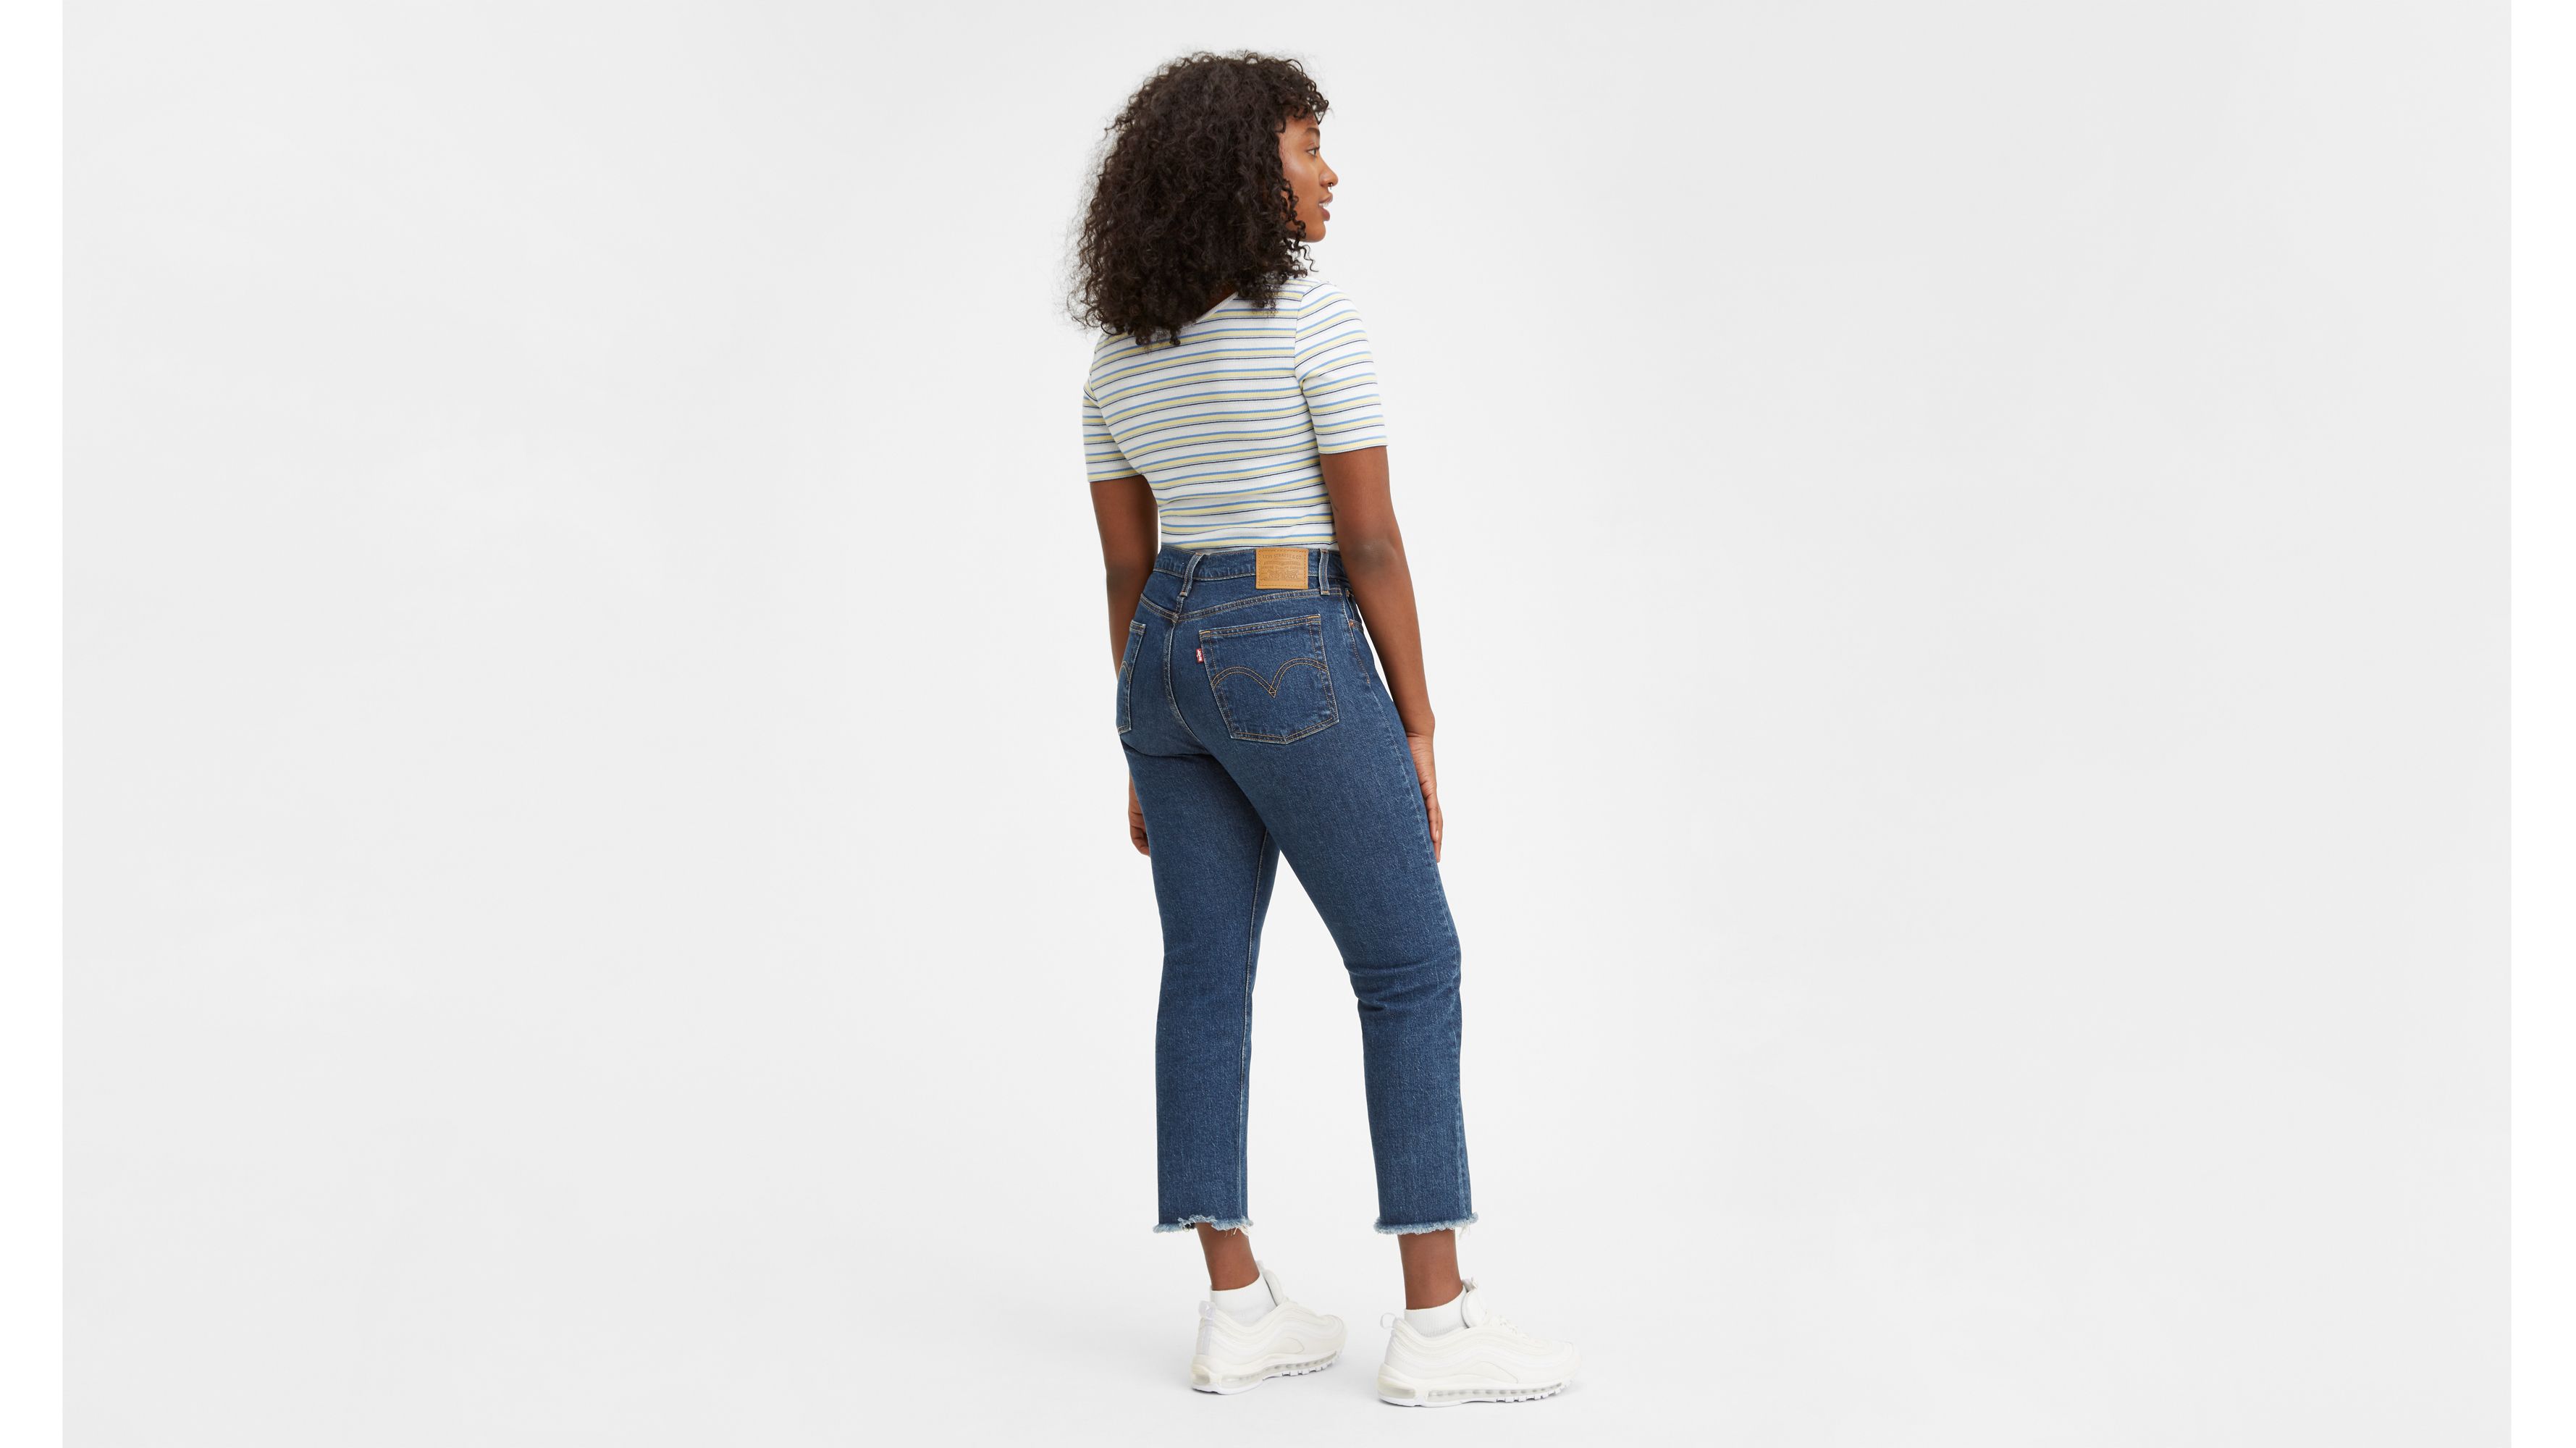 wedgie straight levi jeans